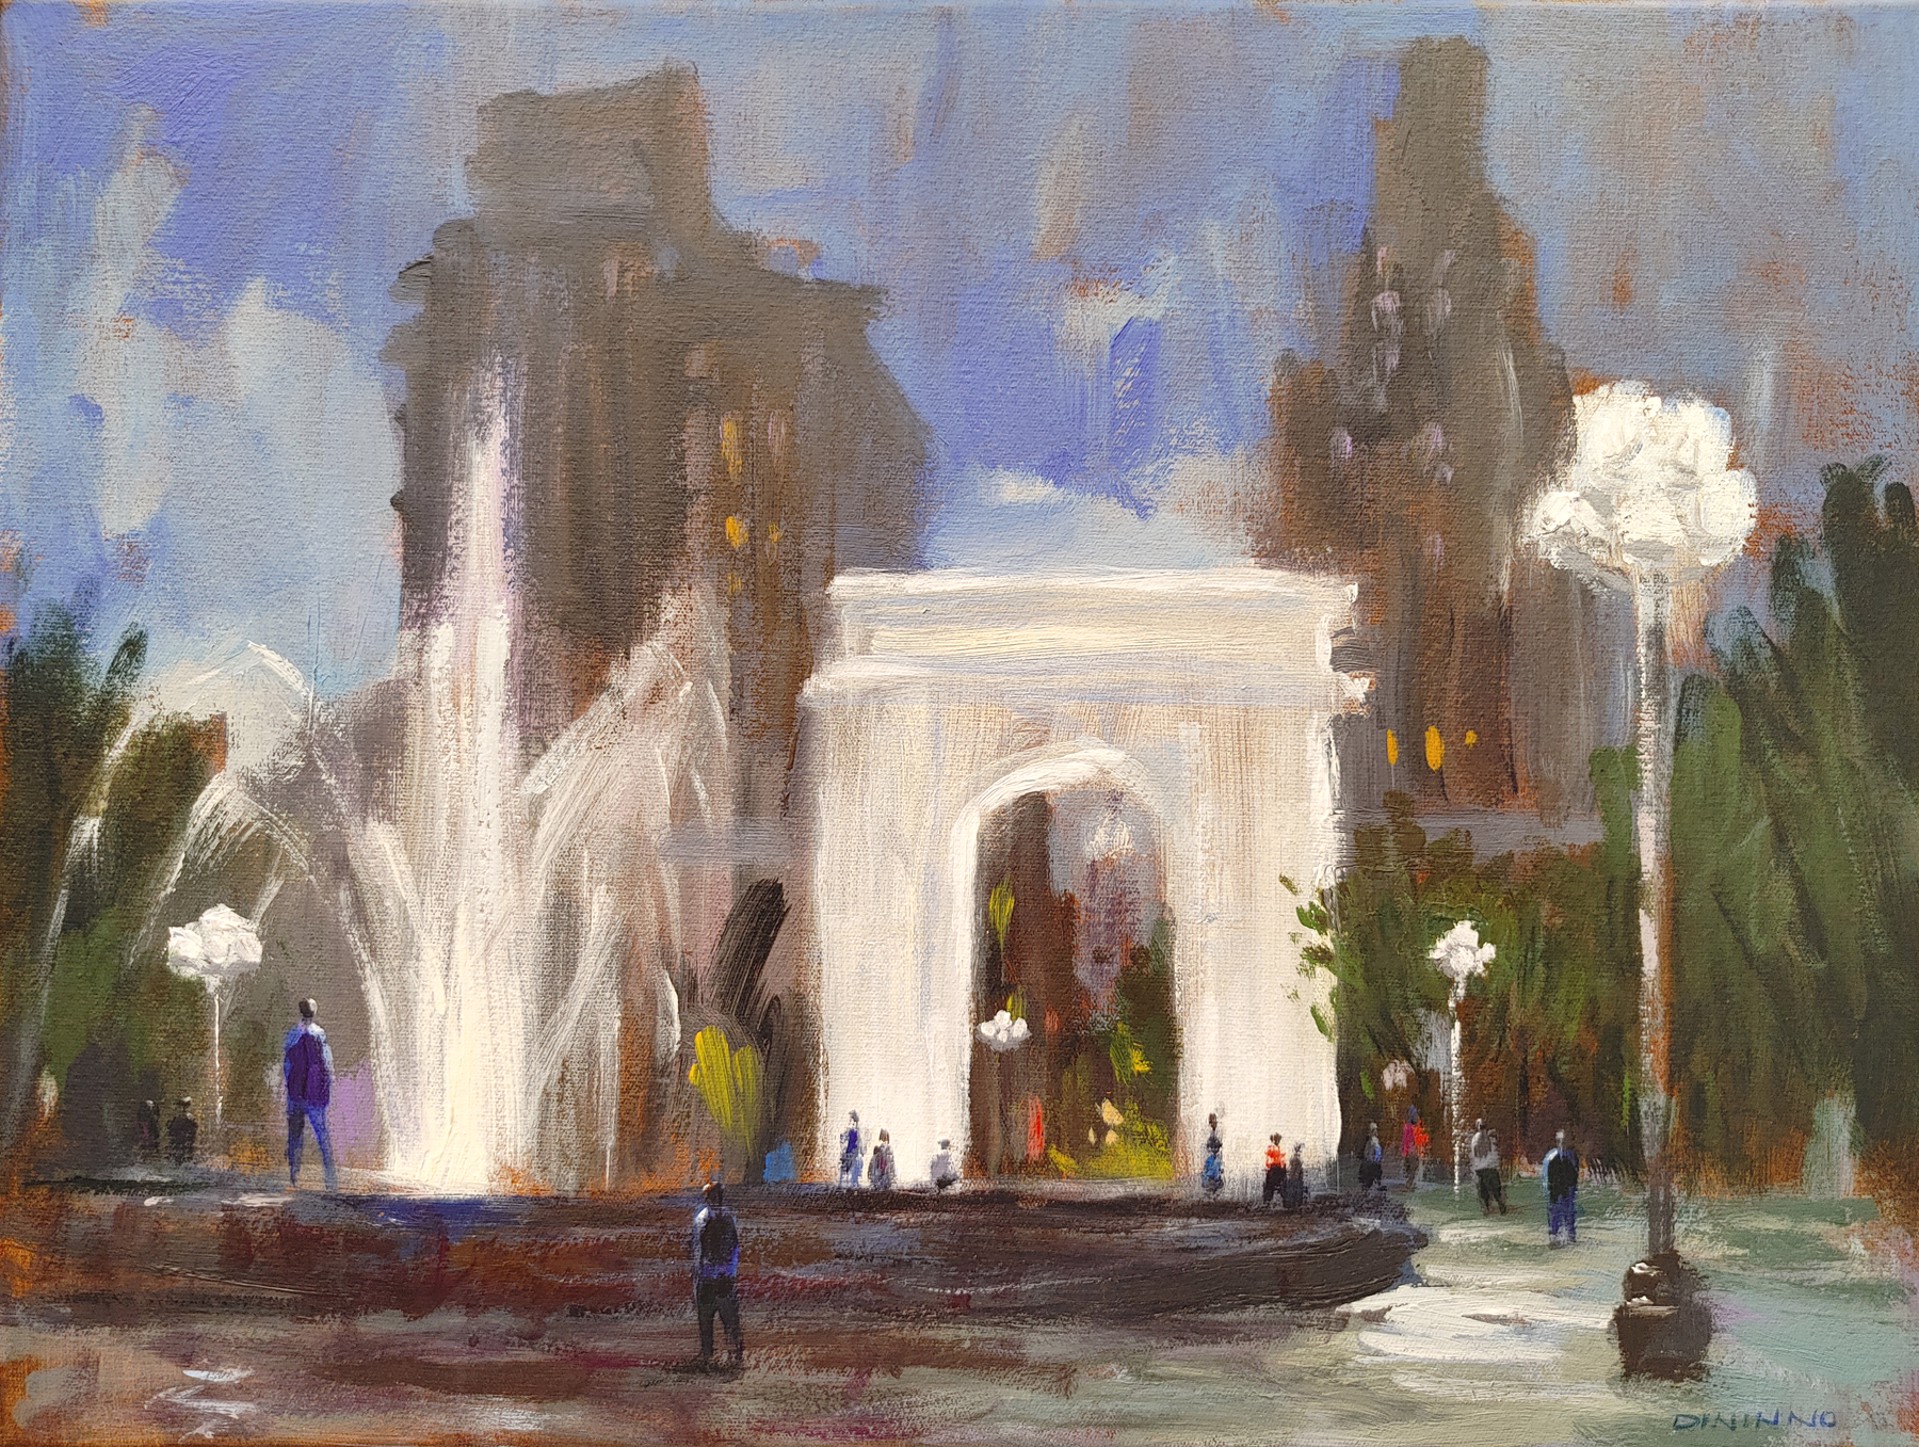 Washington Square Arch in Early Evening by Steve Dininno